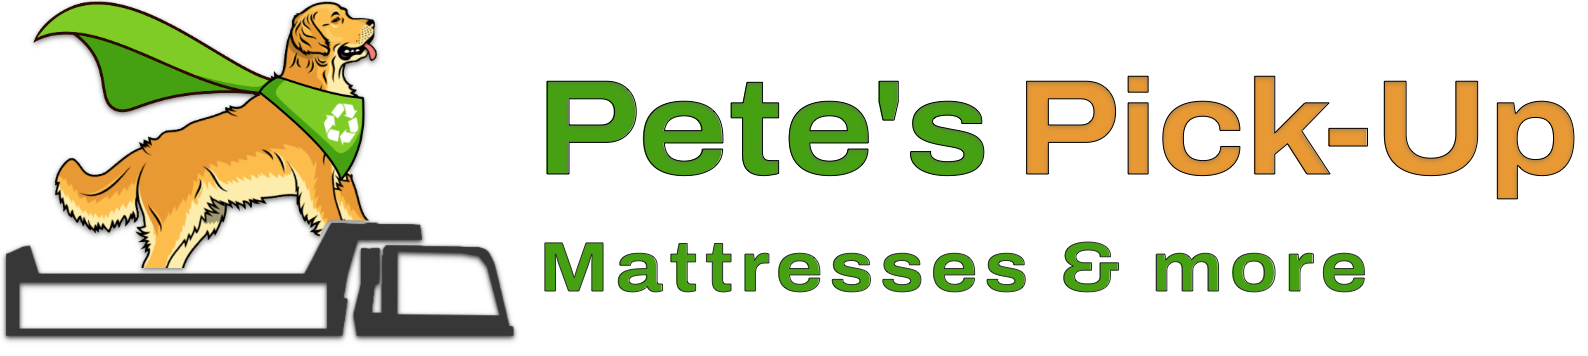 Best Junk Removal Company in Charlottesville & Troy, VA | Pete's Pick-Up Logo